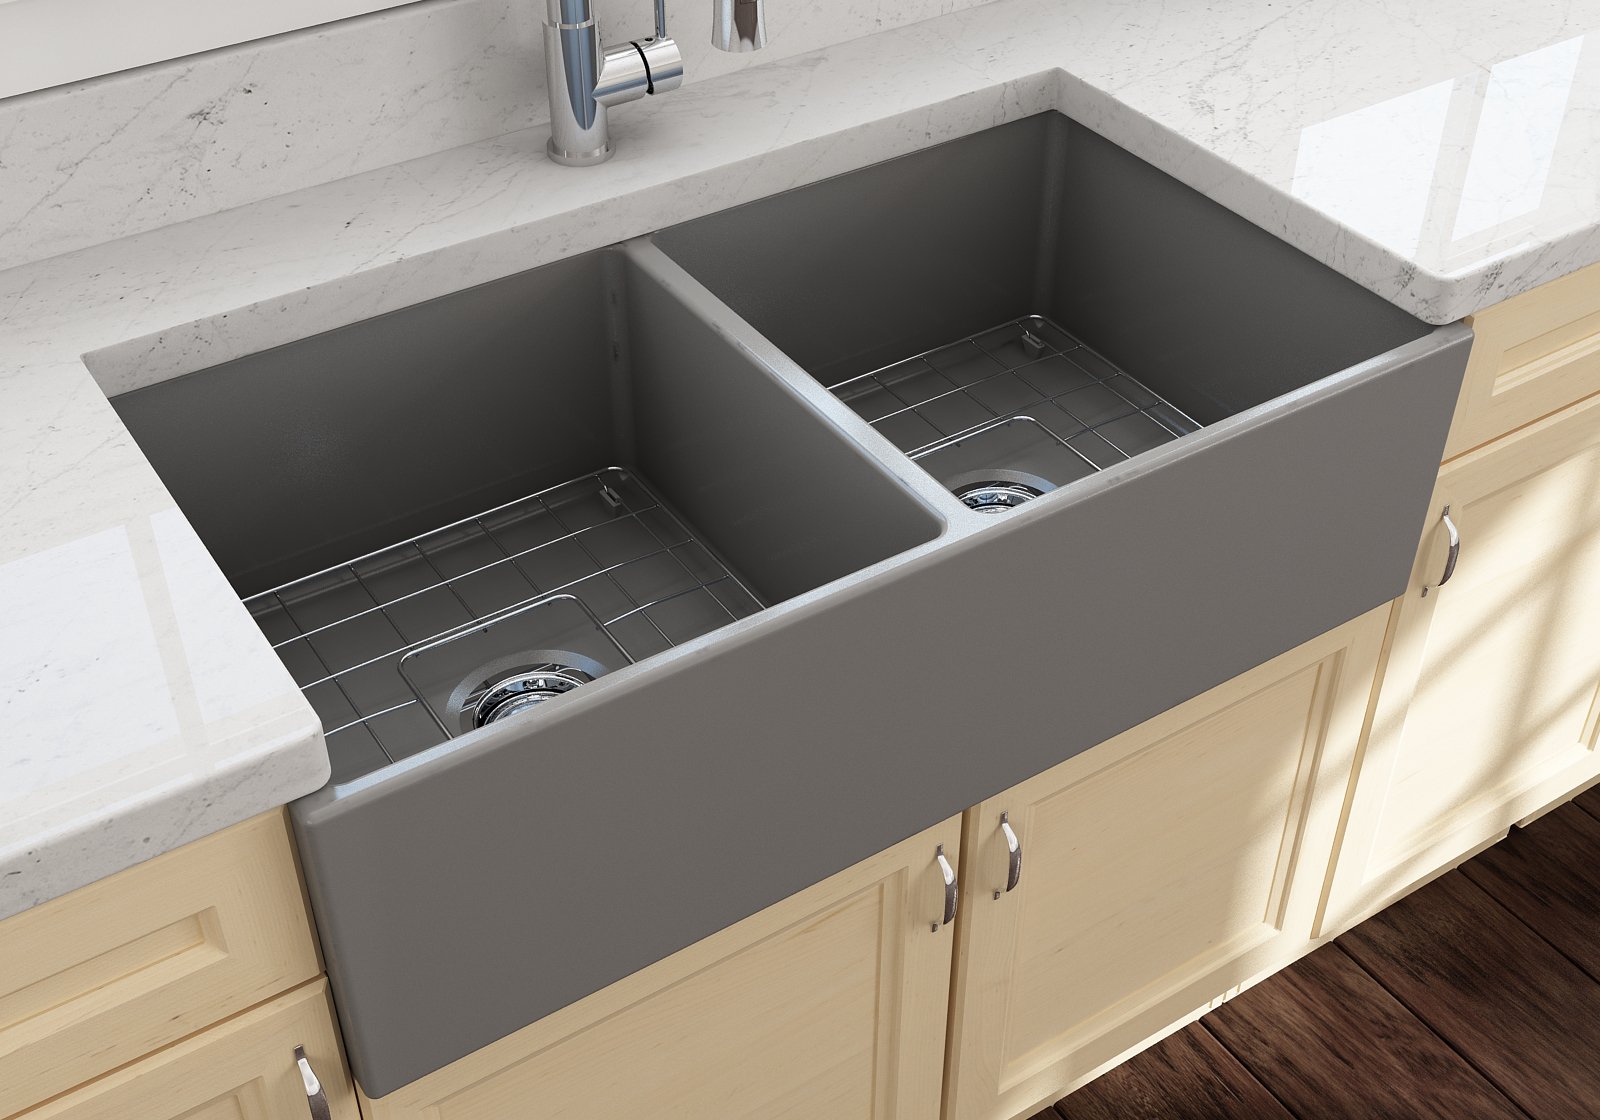 Bocchi Contempo Apron Front Fireclay 36" Double Bowl Kitchen Sink. Available in 9 Colors!